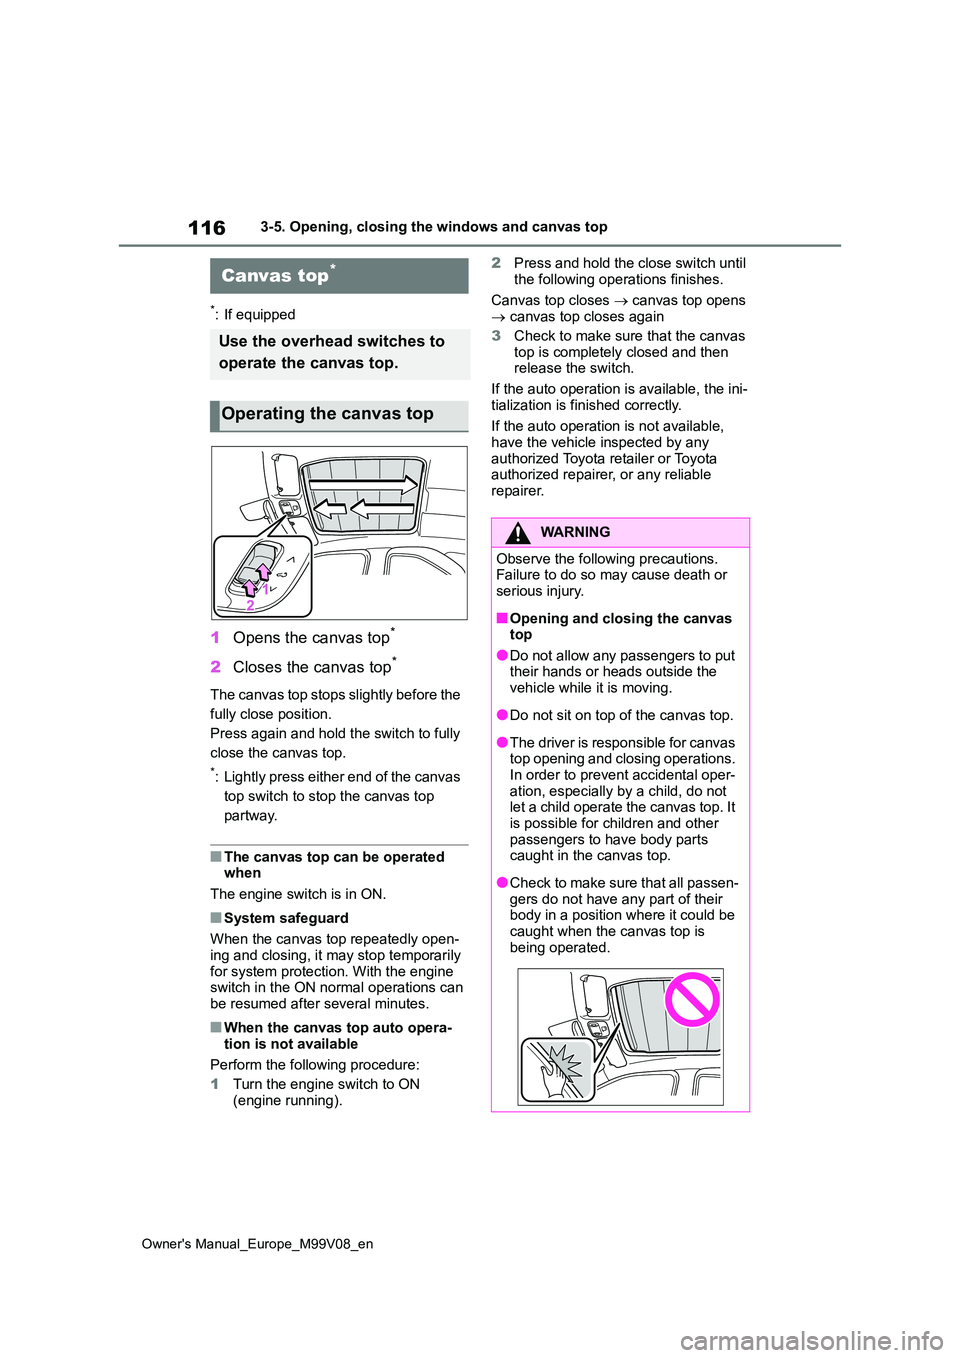 TOYOTA AYGO X 2022  Owners Manual (in English) 116
Owner's Manual_Europe_M99V08_en
3-5. Opening, closing the windows and canvas top
*: If equipped
1Opens the canvas top*
2Closes the canvas top*
The canvas top stops slightly before the  
fully 